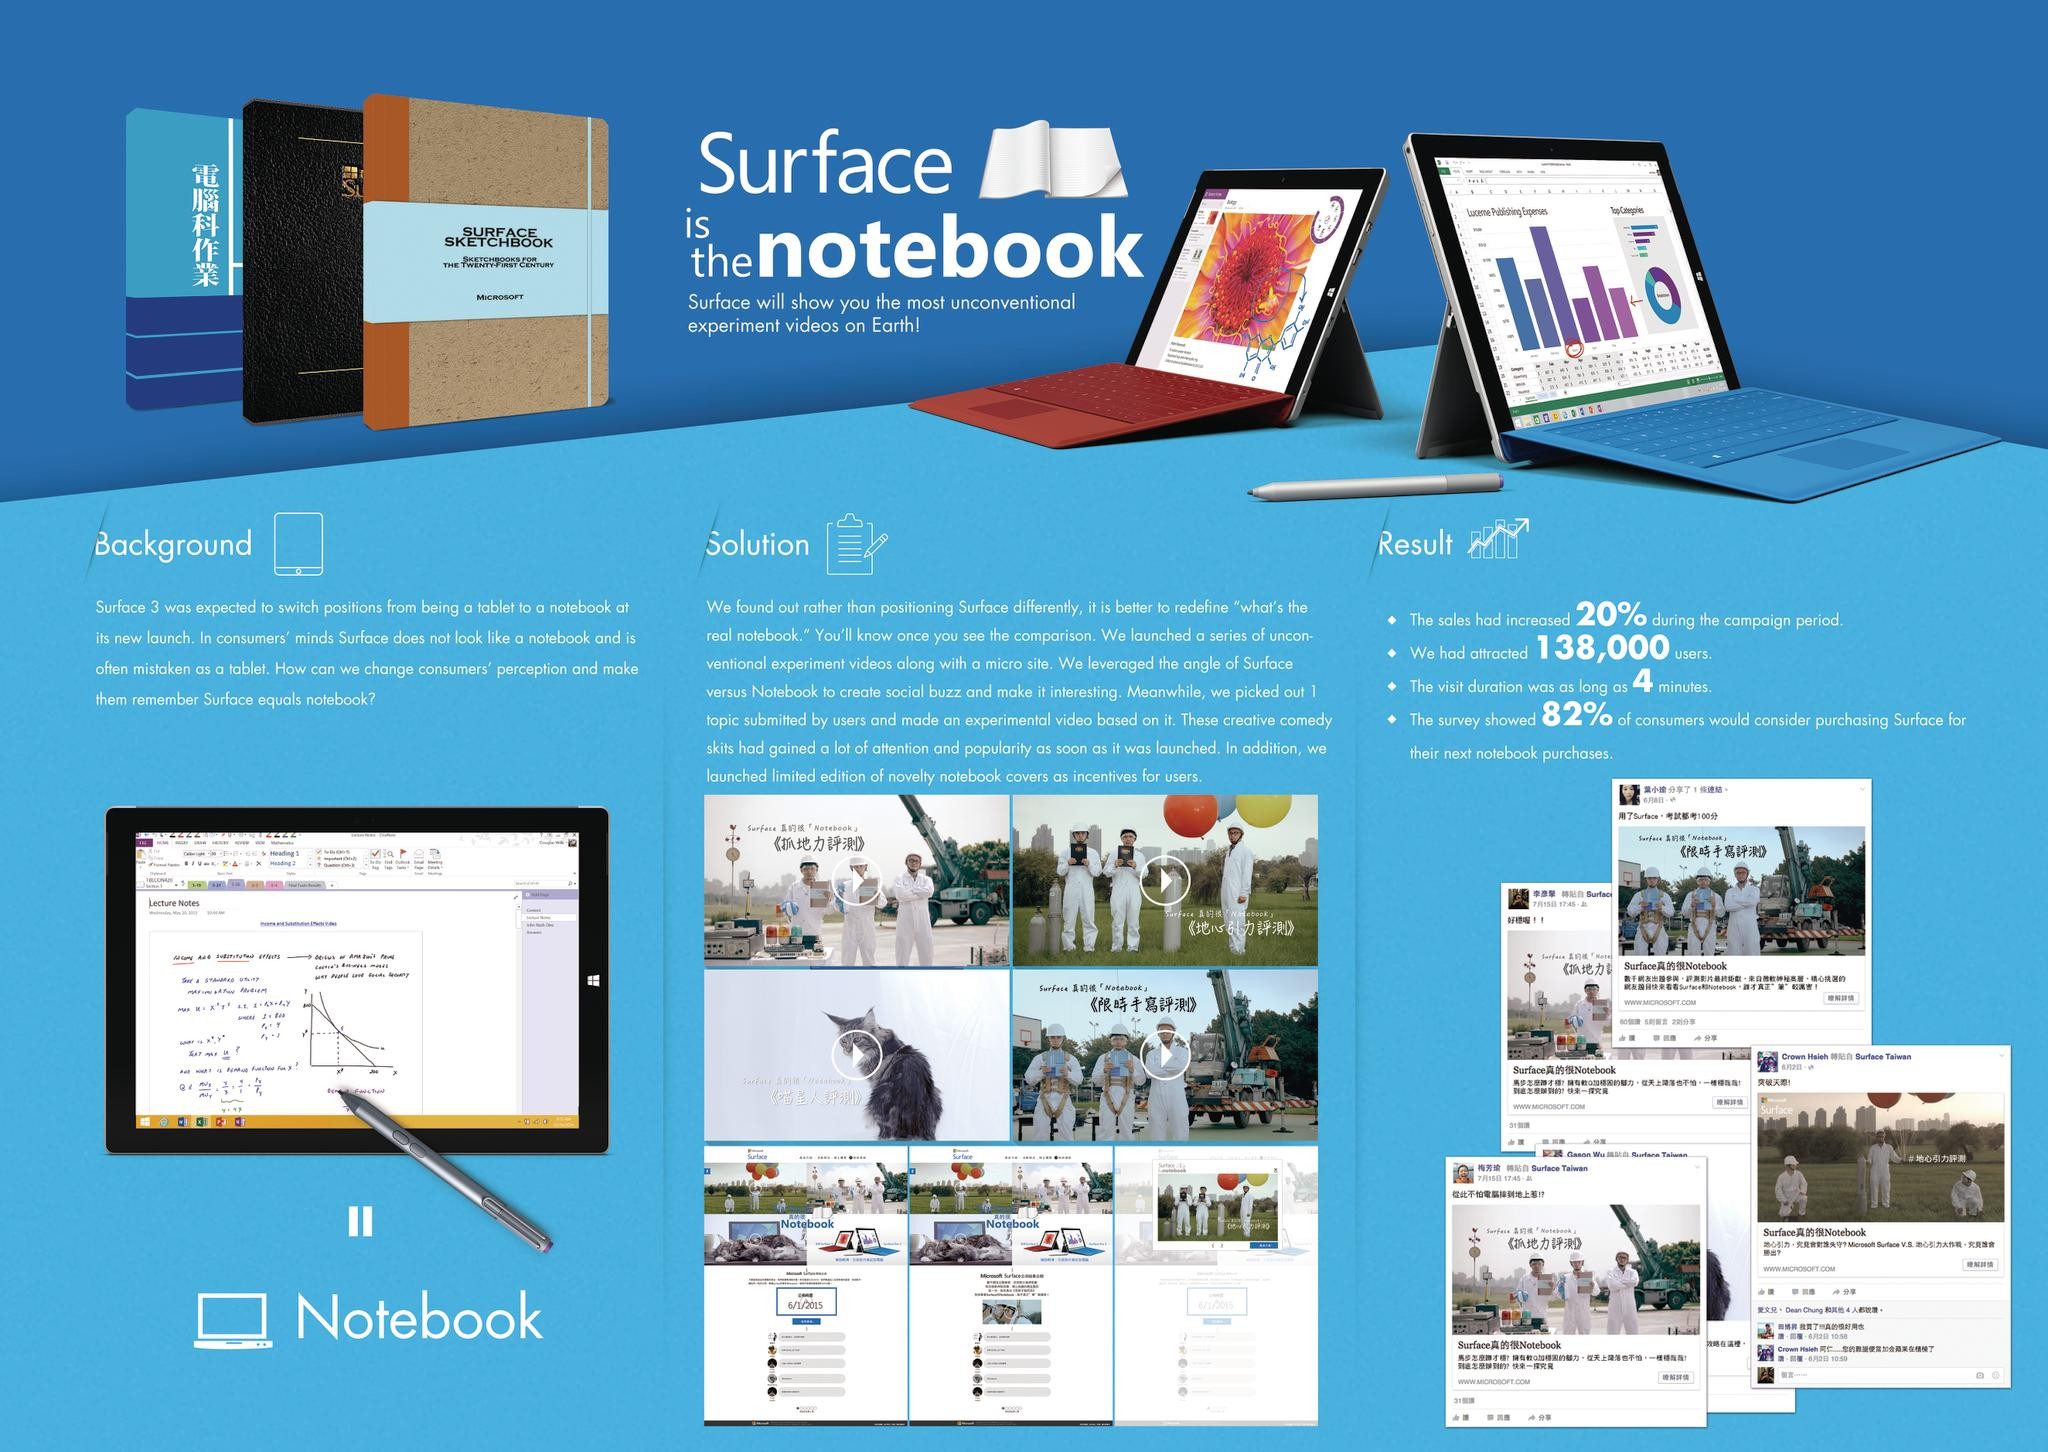 Surface is the "Notebook"